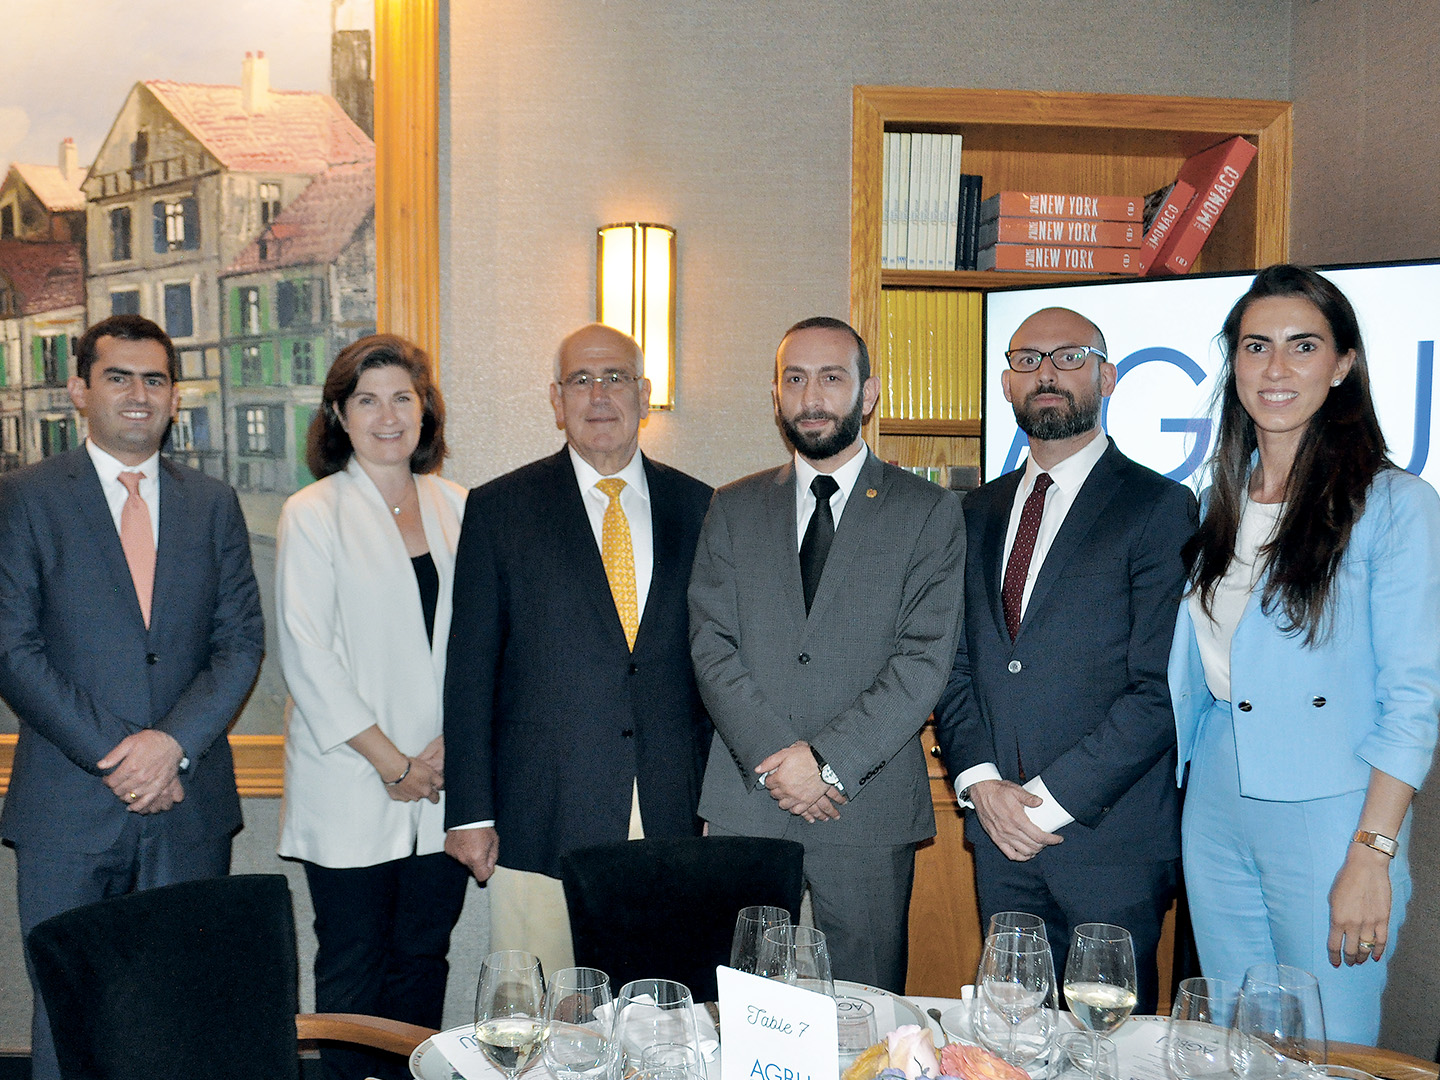 AGBU sets the table for a new relationship between Armenia and Diaspora